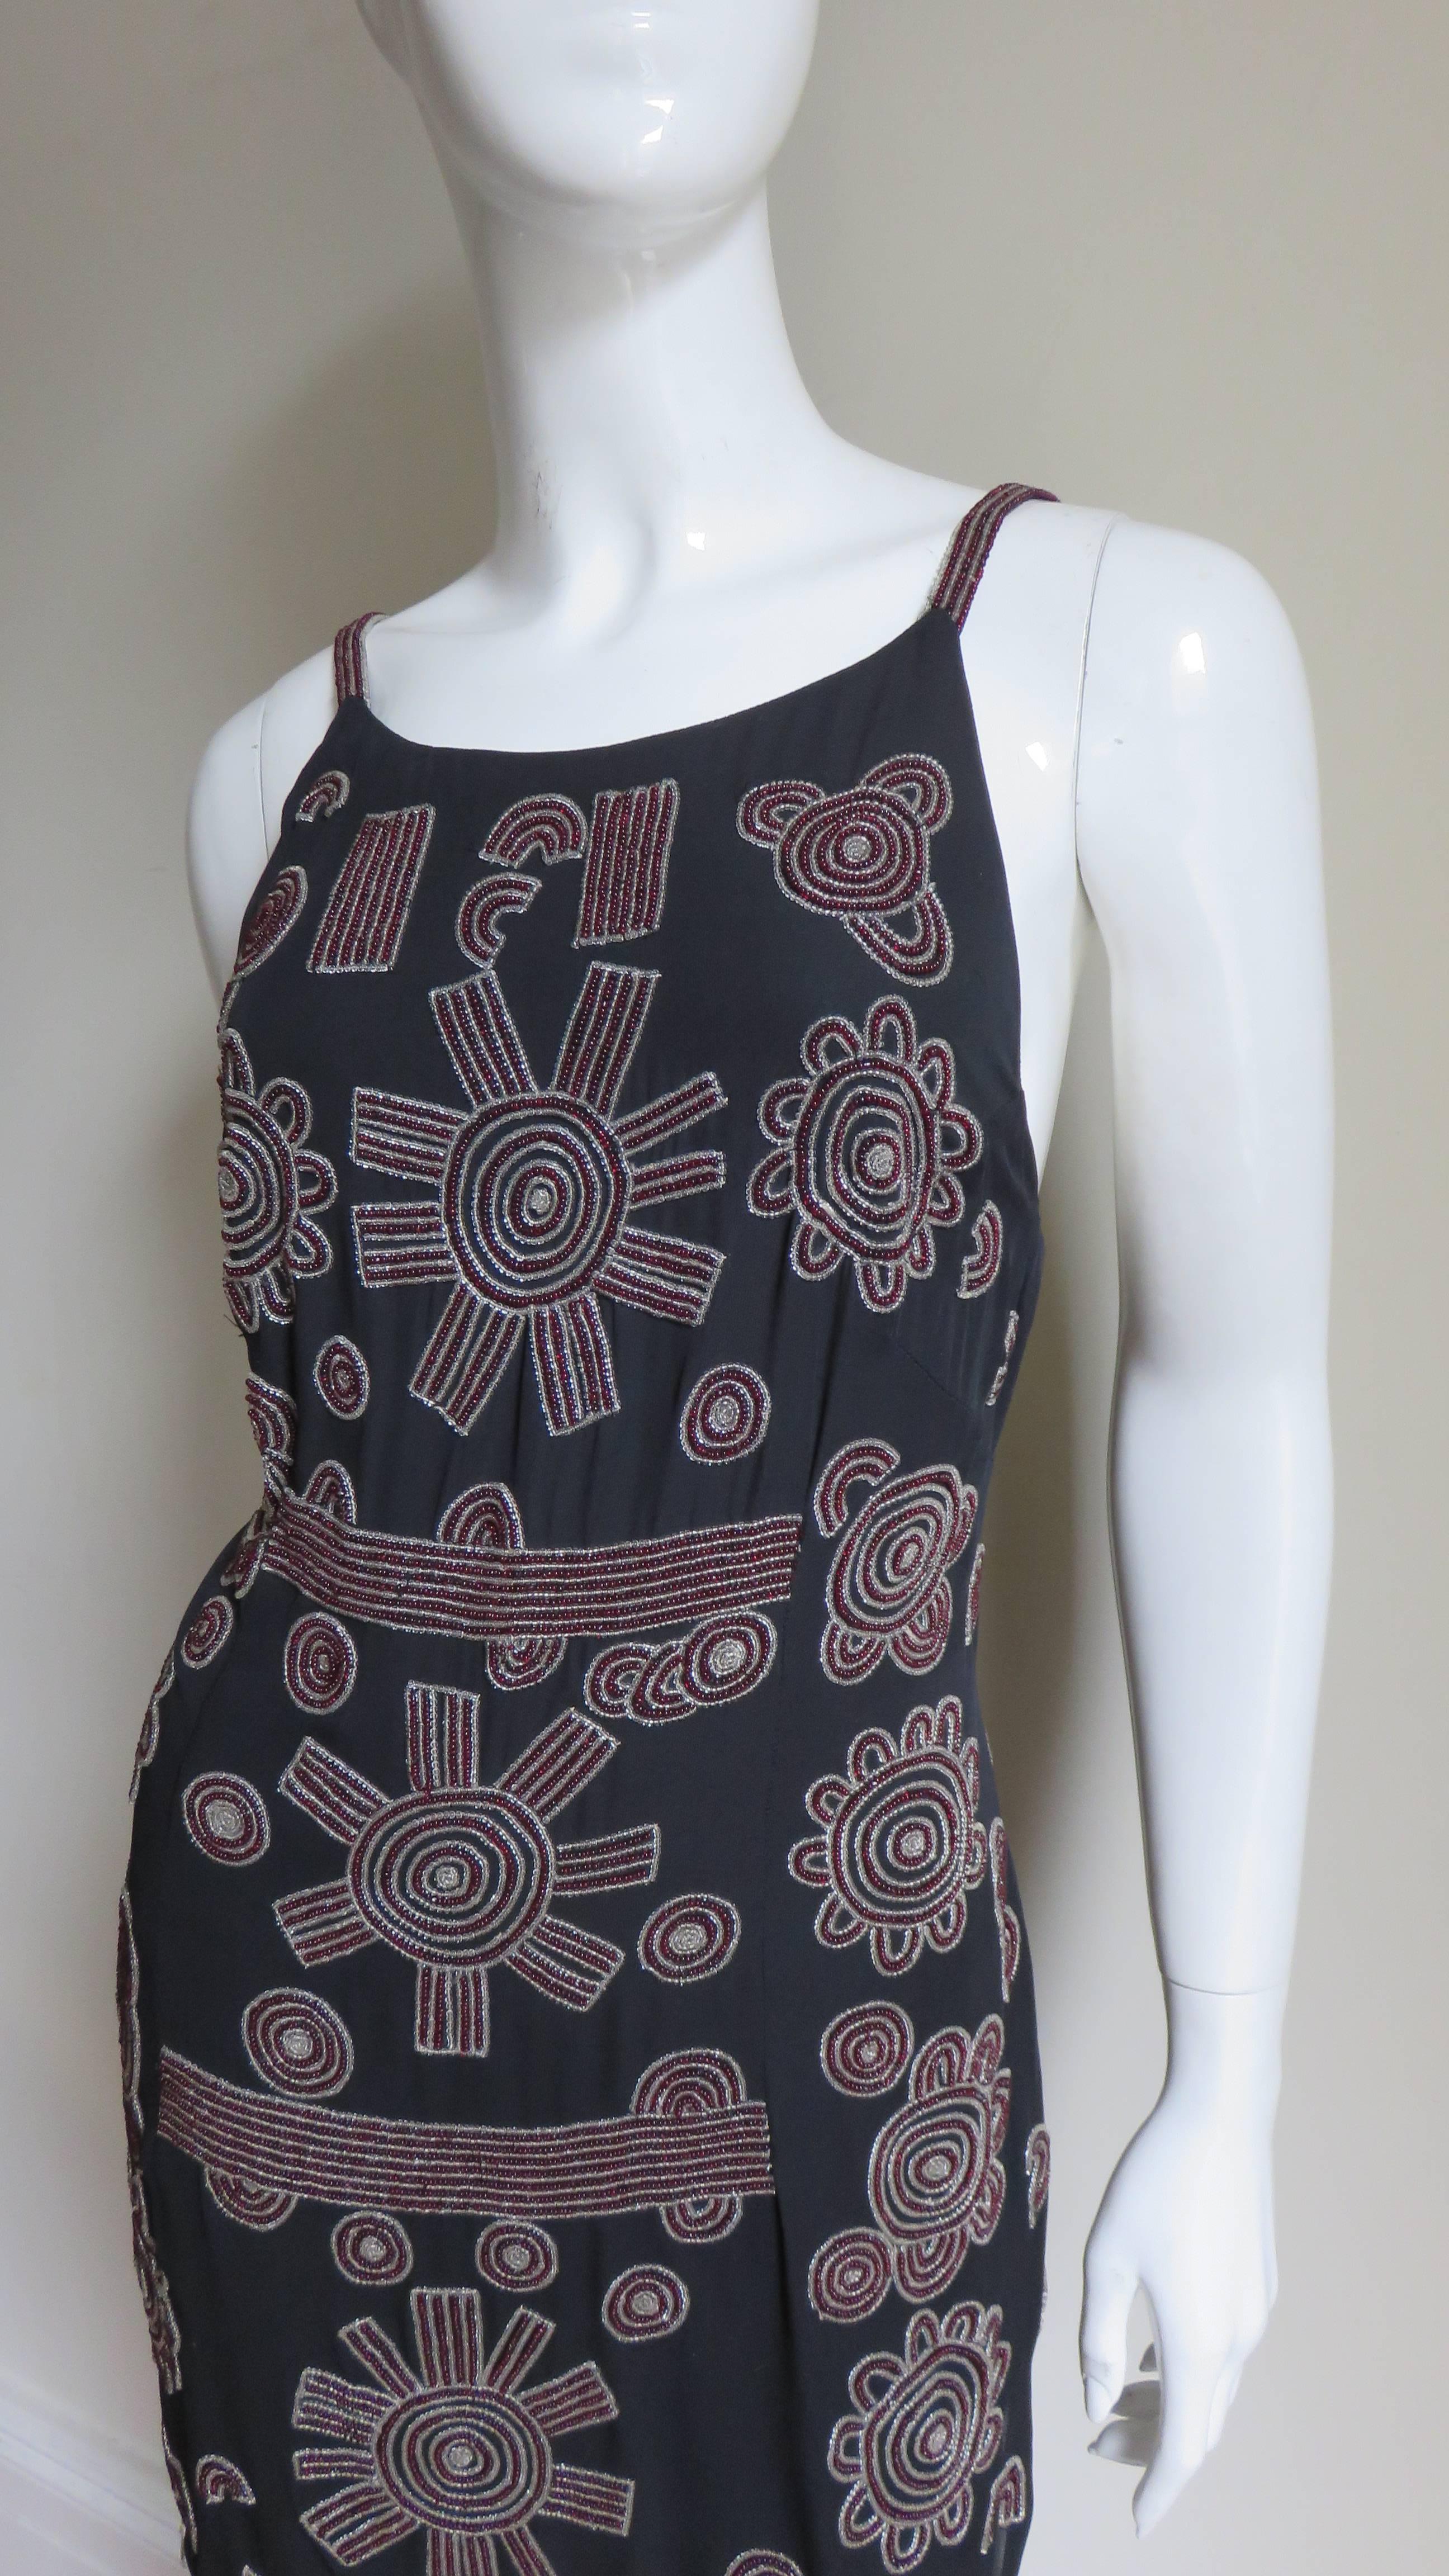 Beautifully beaded in clear and burgundy glass beads forming intricately detailed patterns of circles and lines on navy silk. Low back with zipper, shirttail hem and fully lined in the same navy silk. Absolutely beautiful.
Appears unworn. Fits size